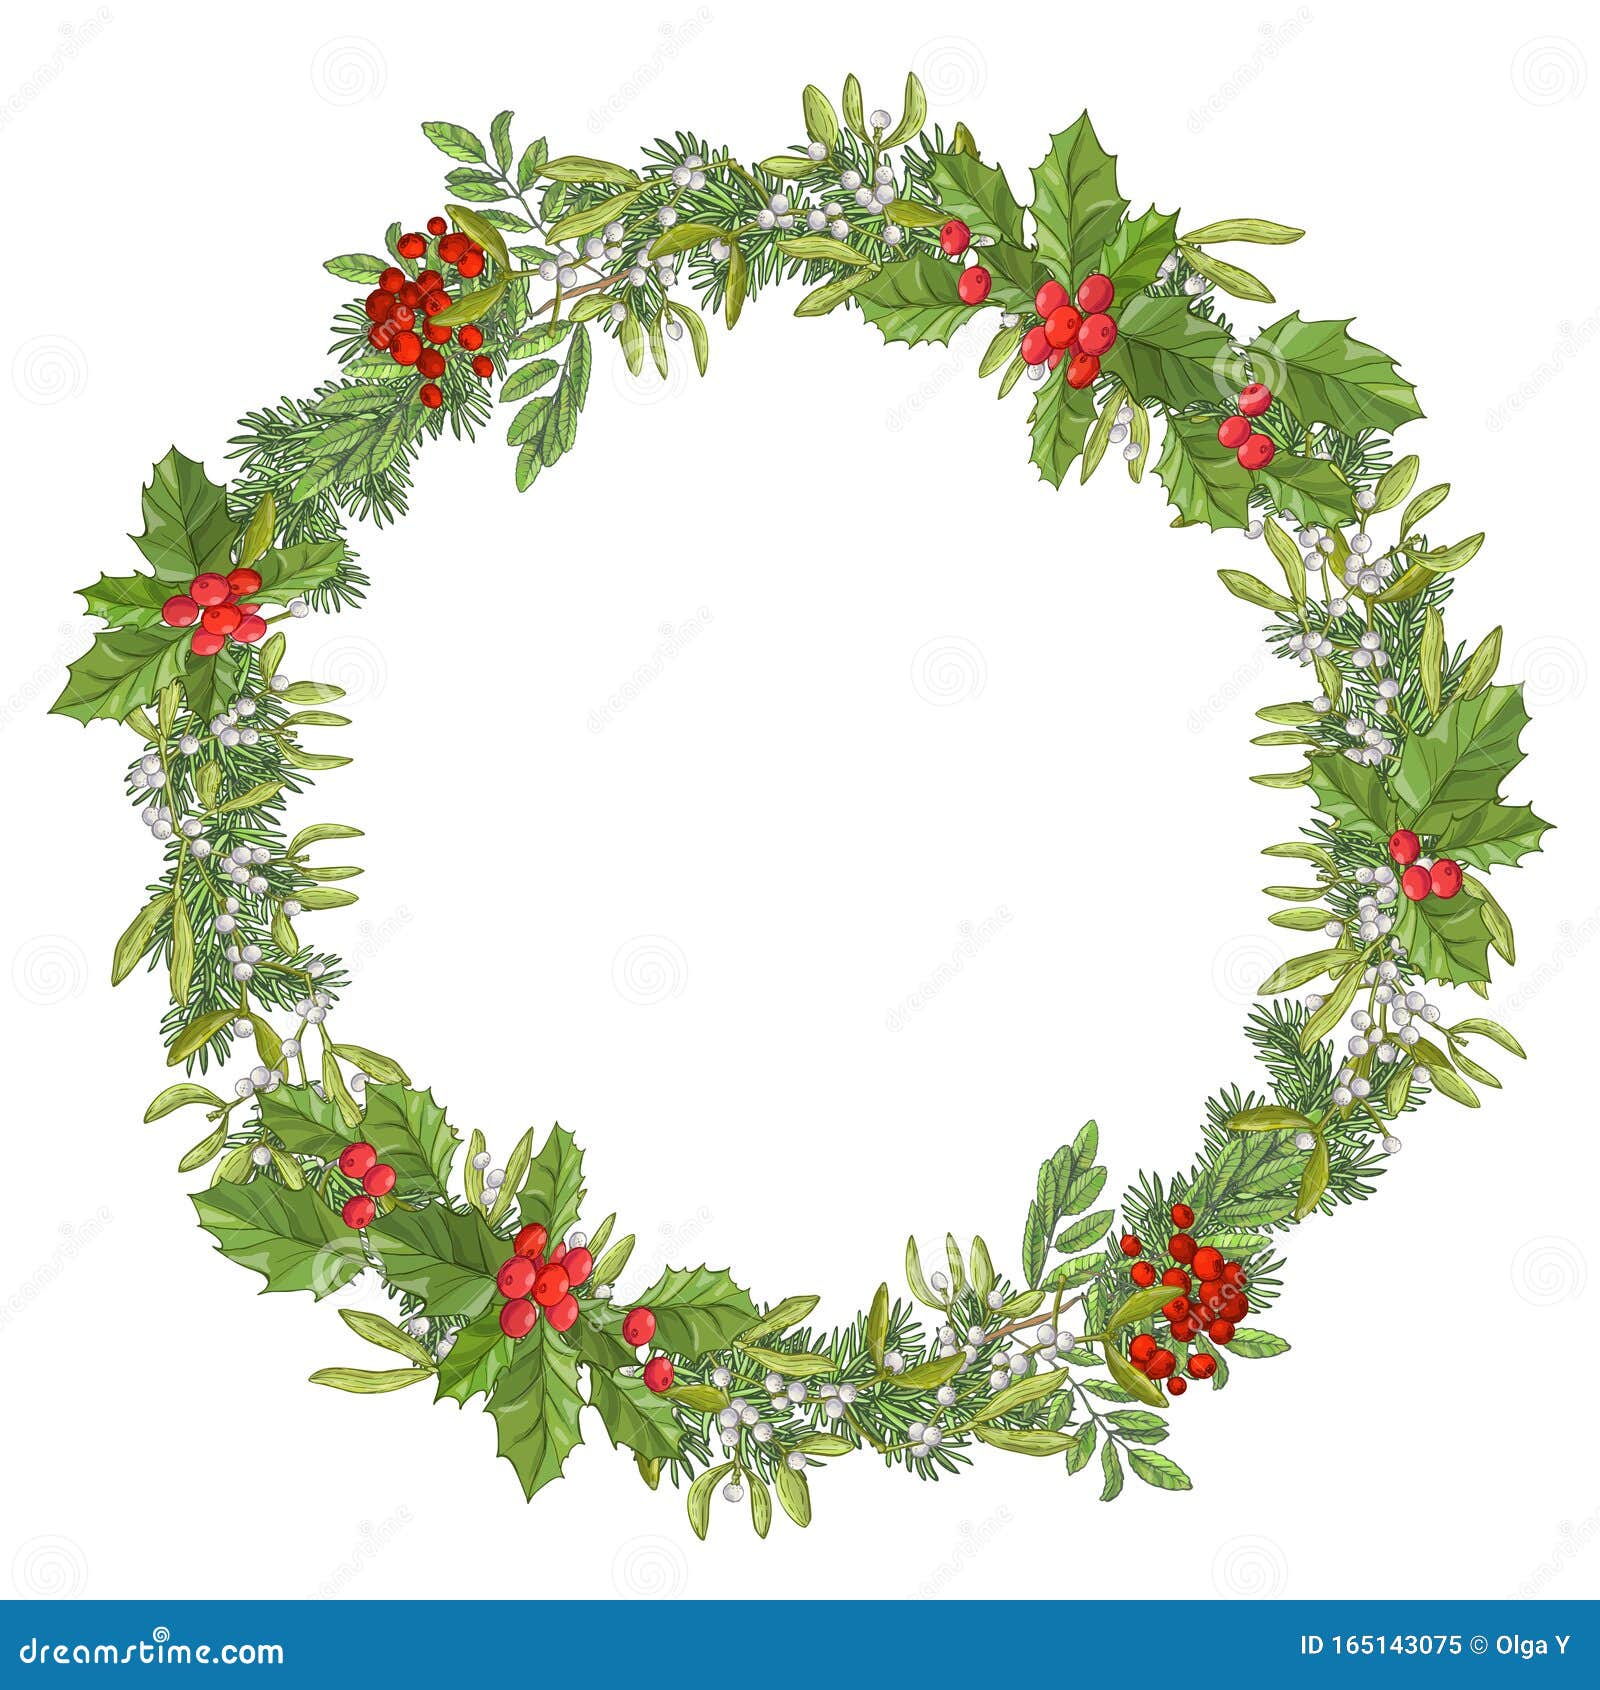 Festive Red Berry Foliage Holiday Wreath